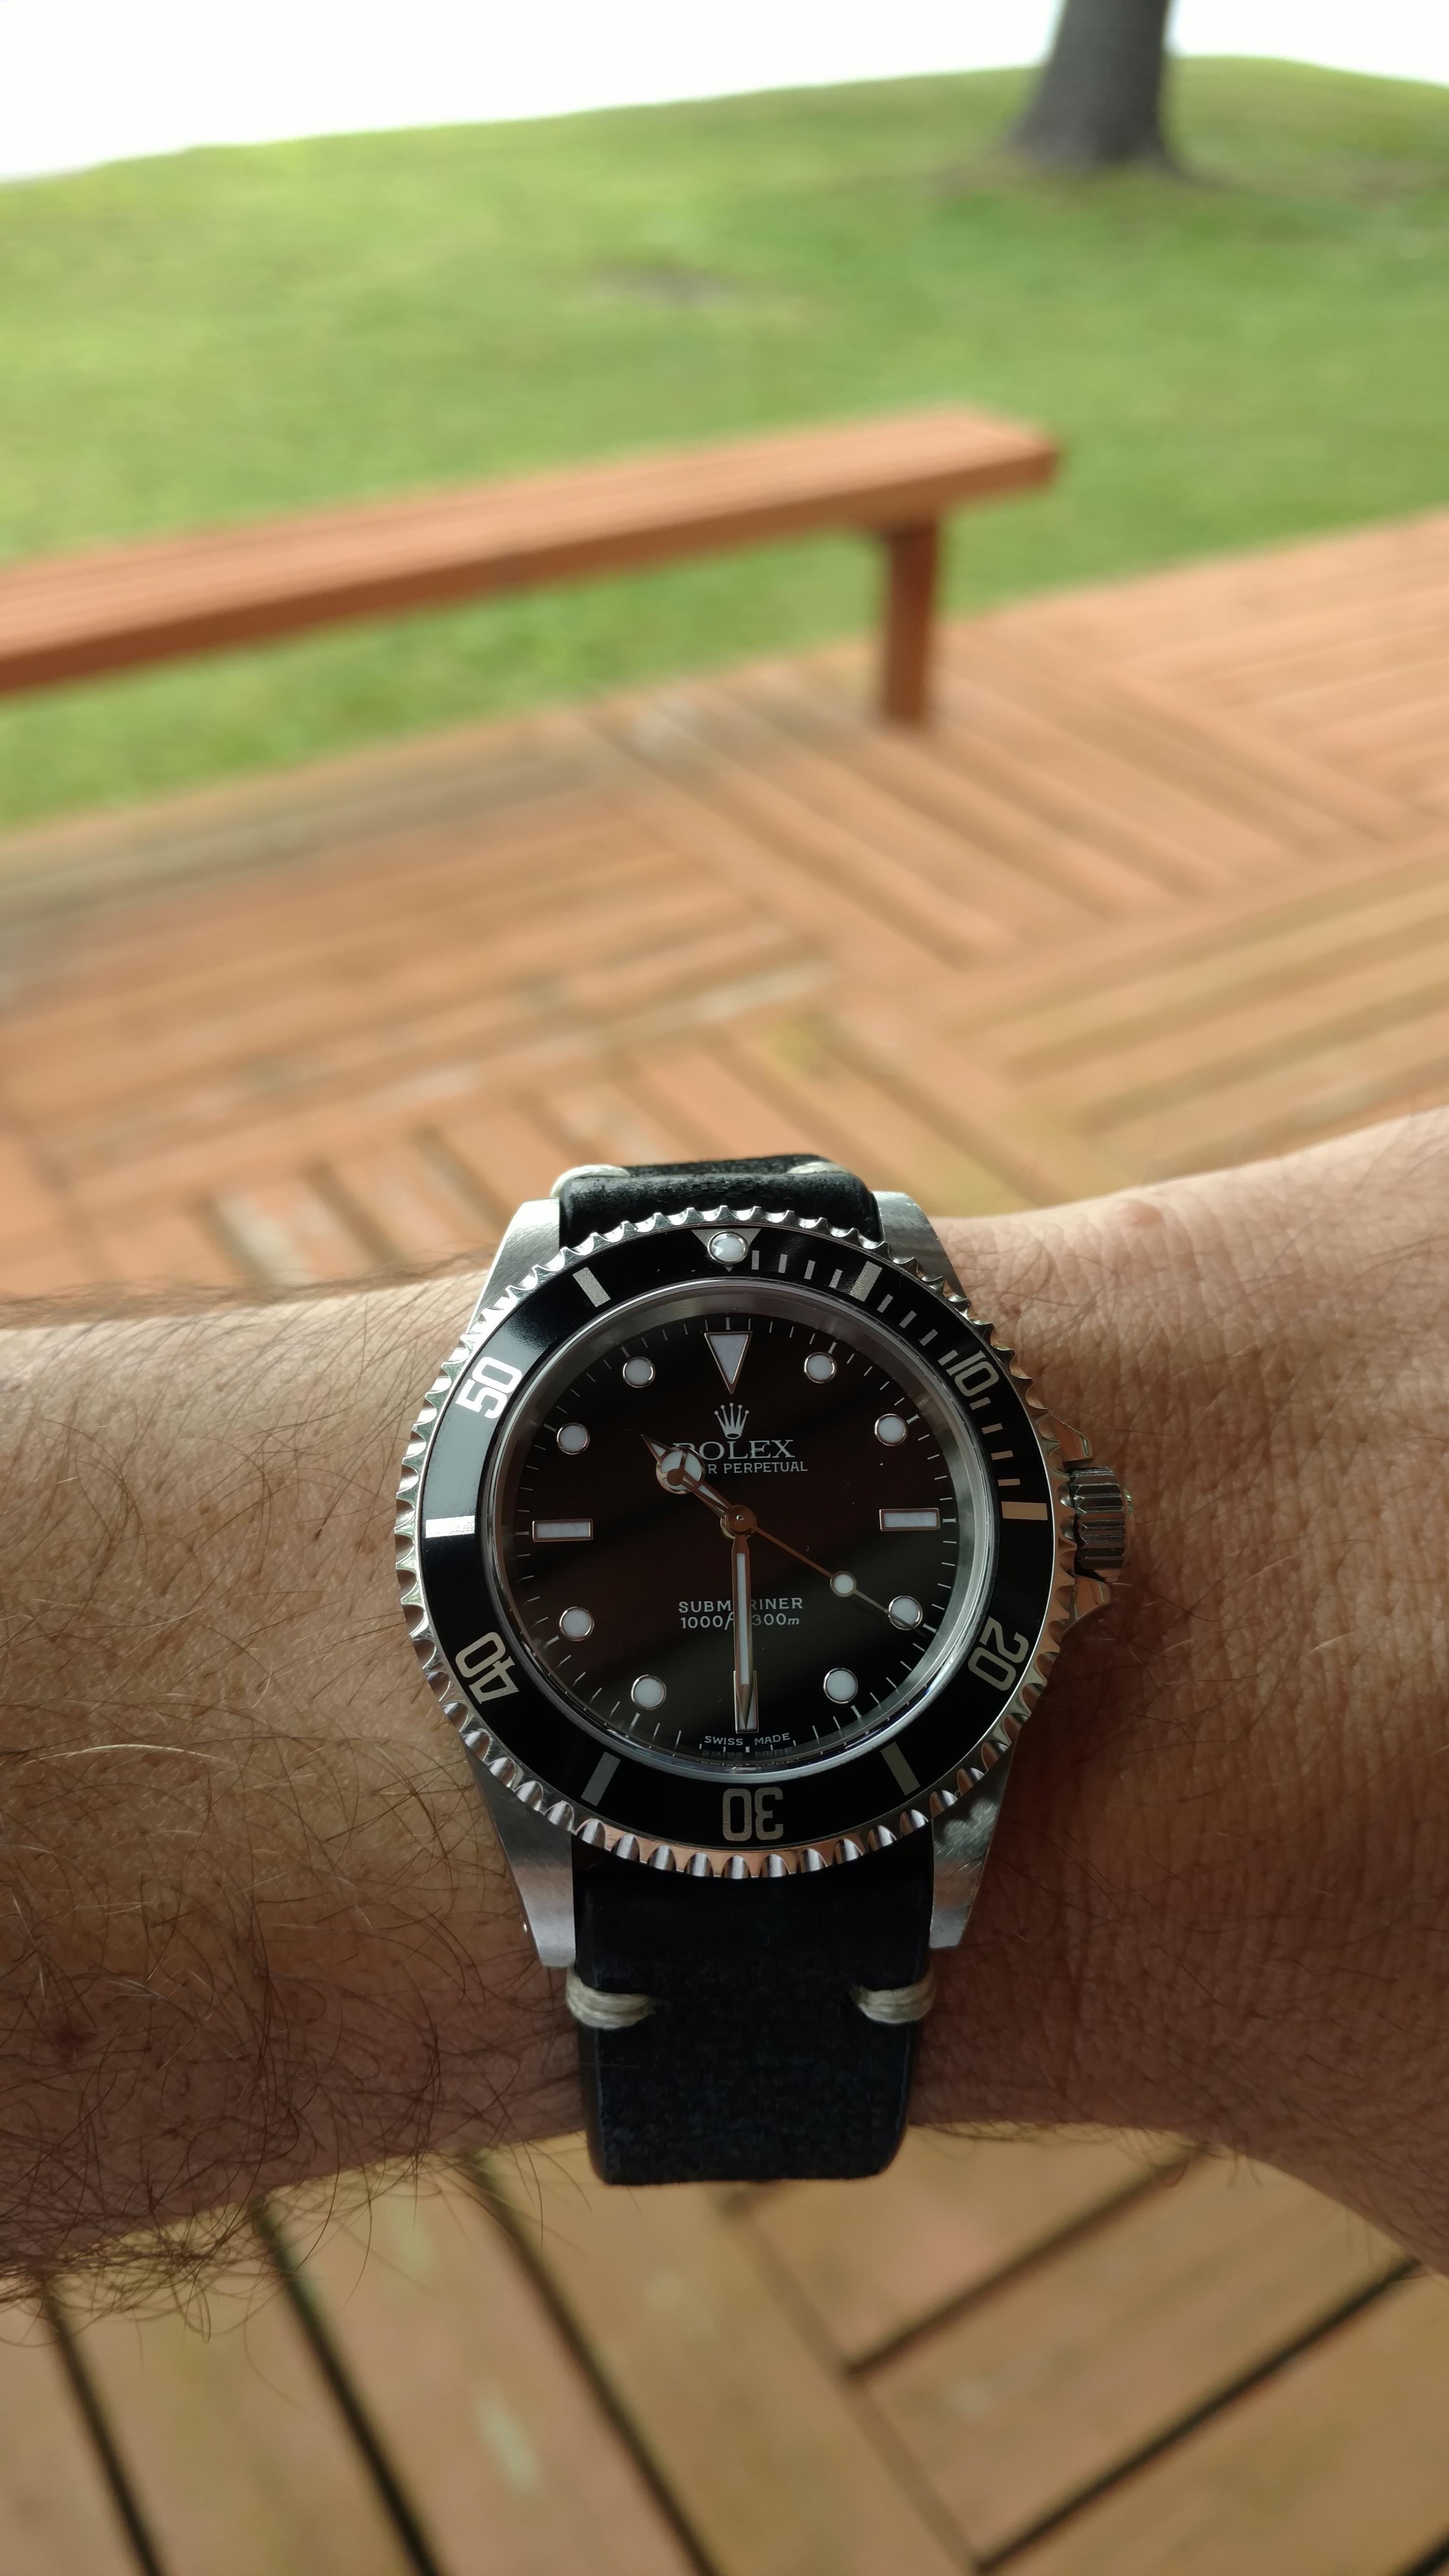 Why The Hatred for Dive Watches on Leather Straps | WatchUSeek Watch Forums